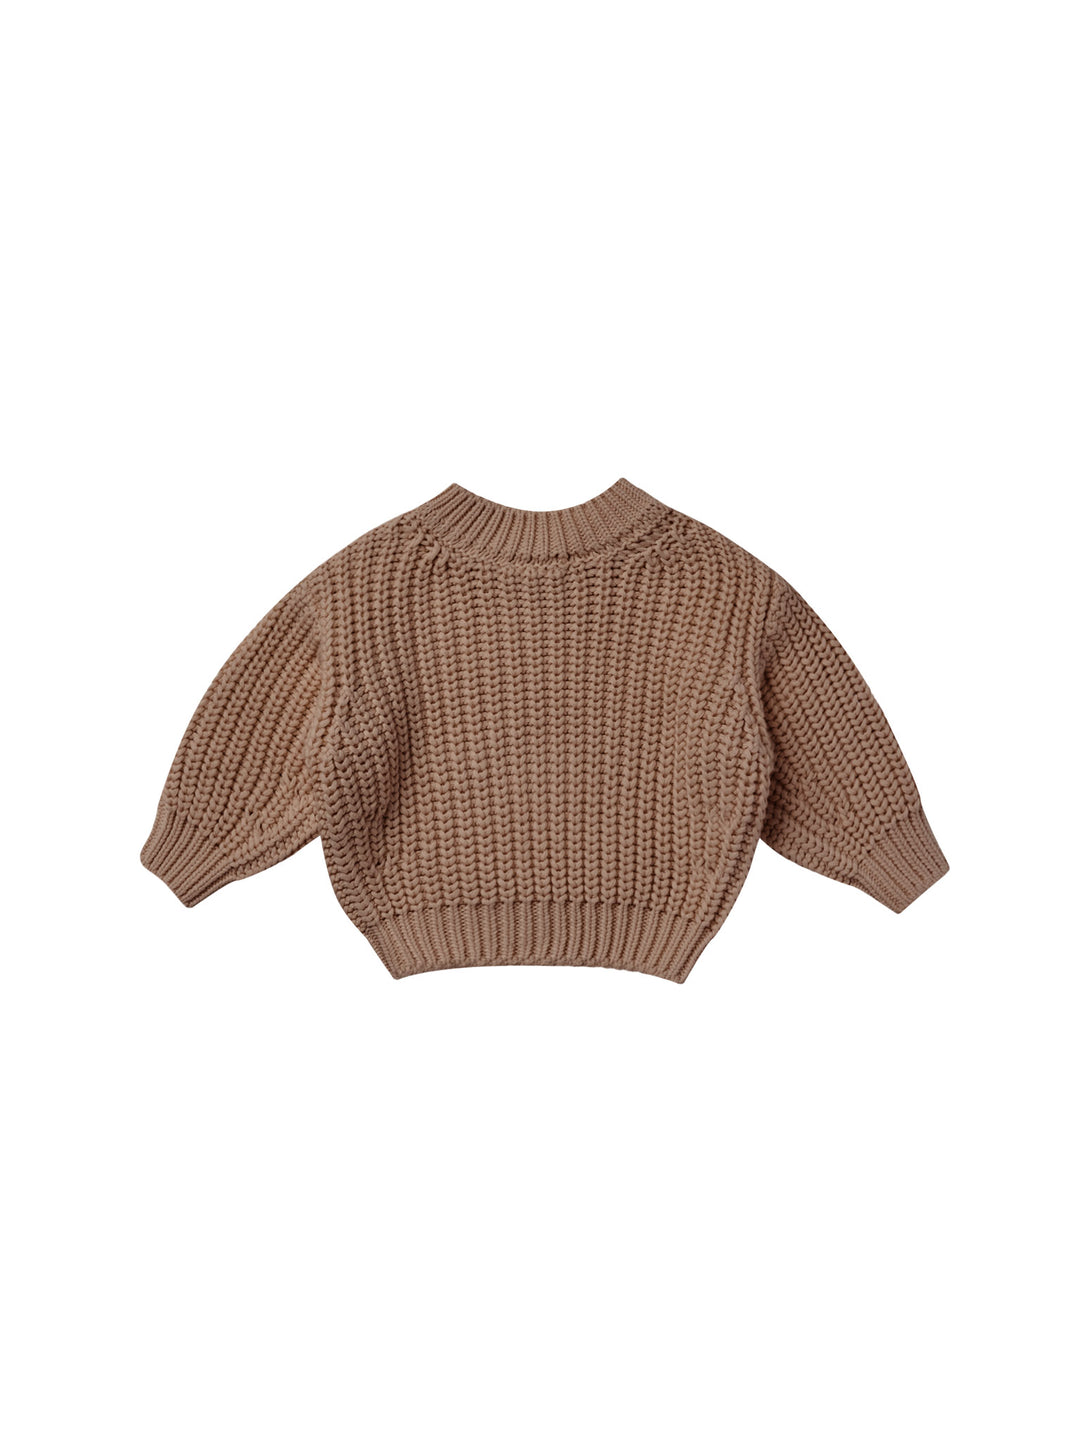 Chunky Knit Sweater | Cocoa